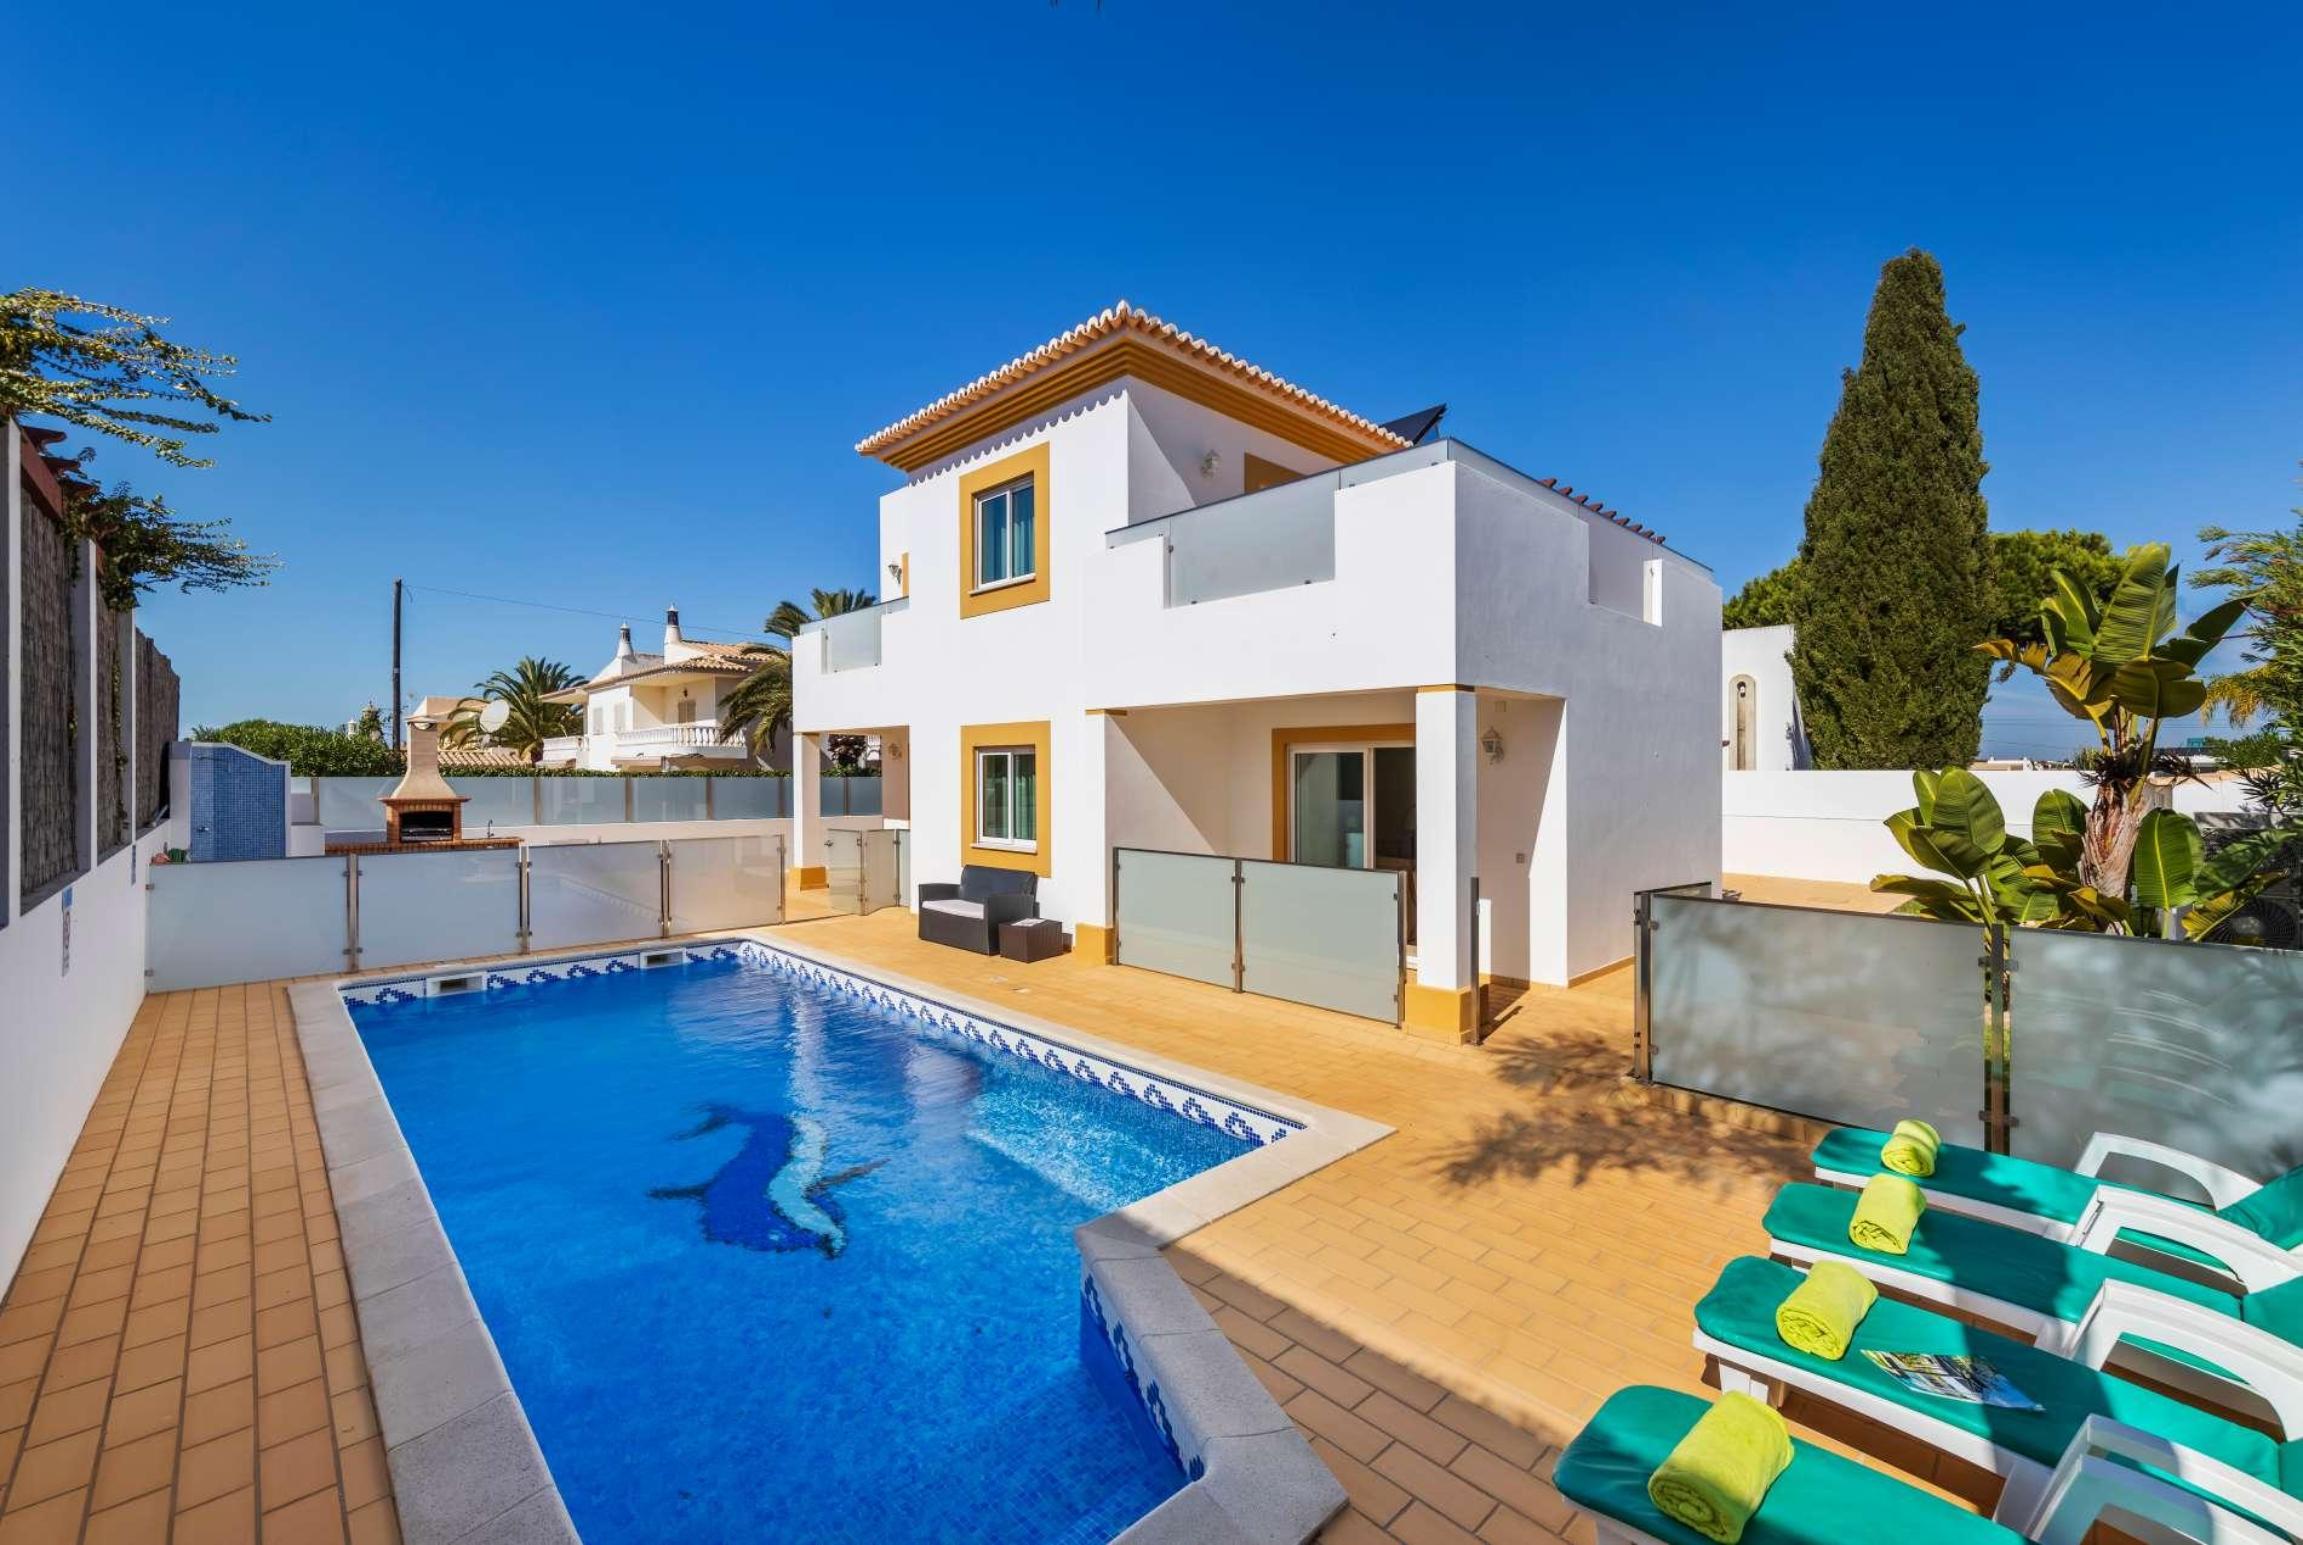 Property Image 2 - Great villa with a gated pool.